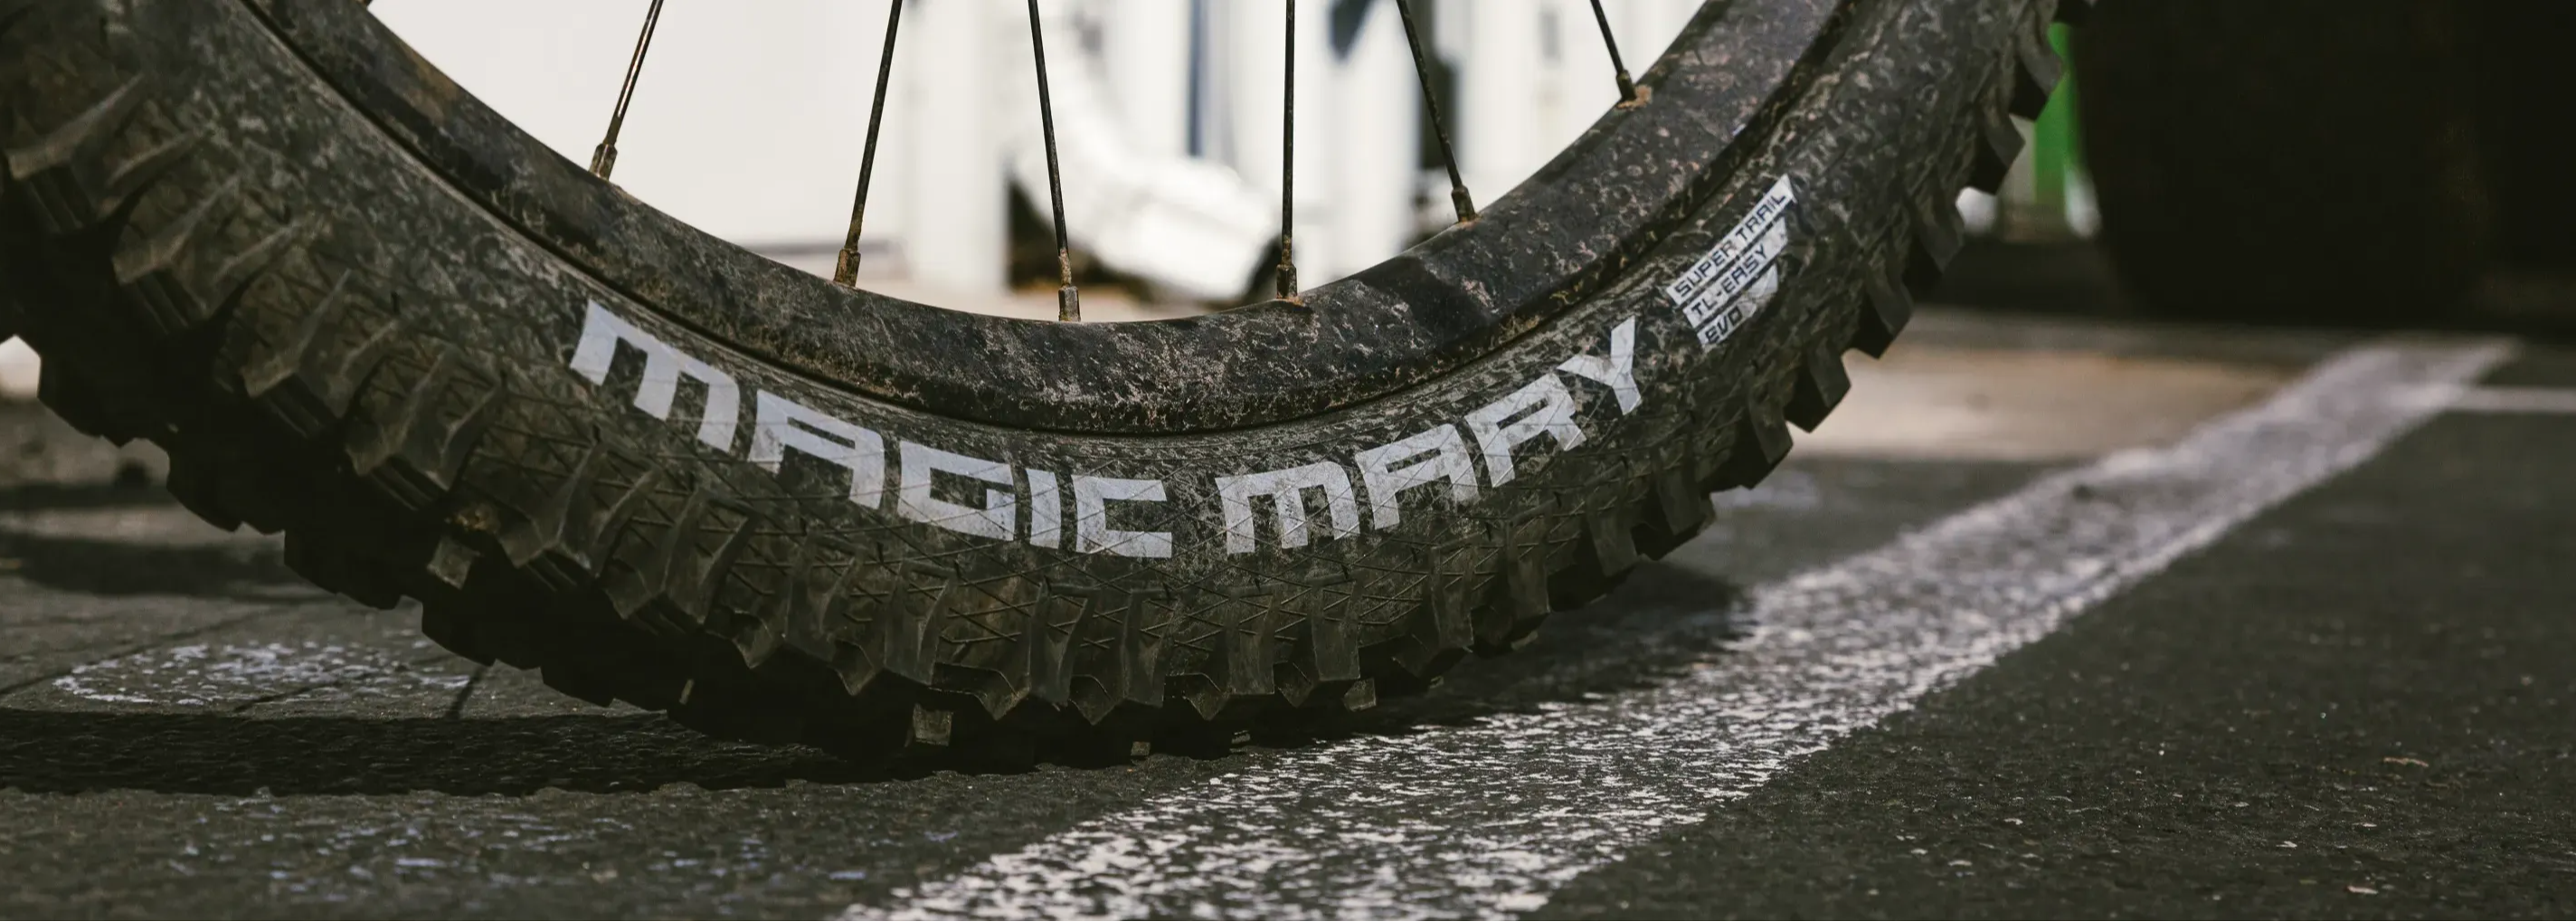 a dirty schwalbe magic mary on the pavement